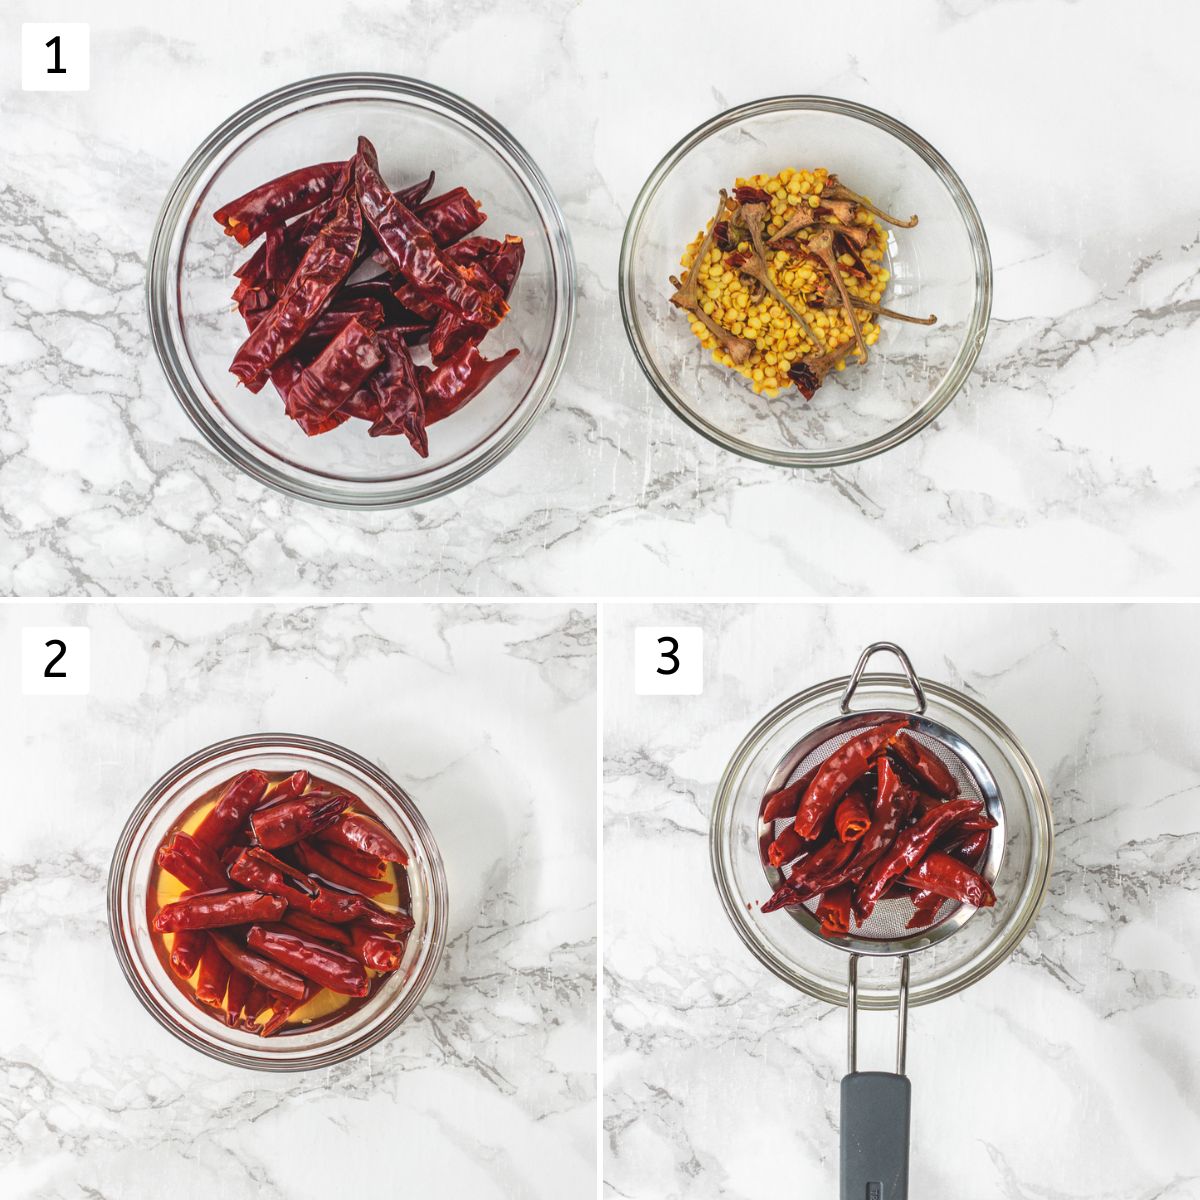 Collage of 3 images showing dried red chilies and seeds in seperate bowls, soaking chilies and drained water.